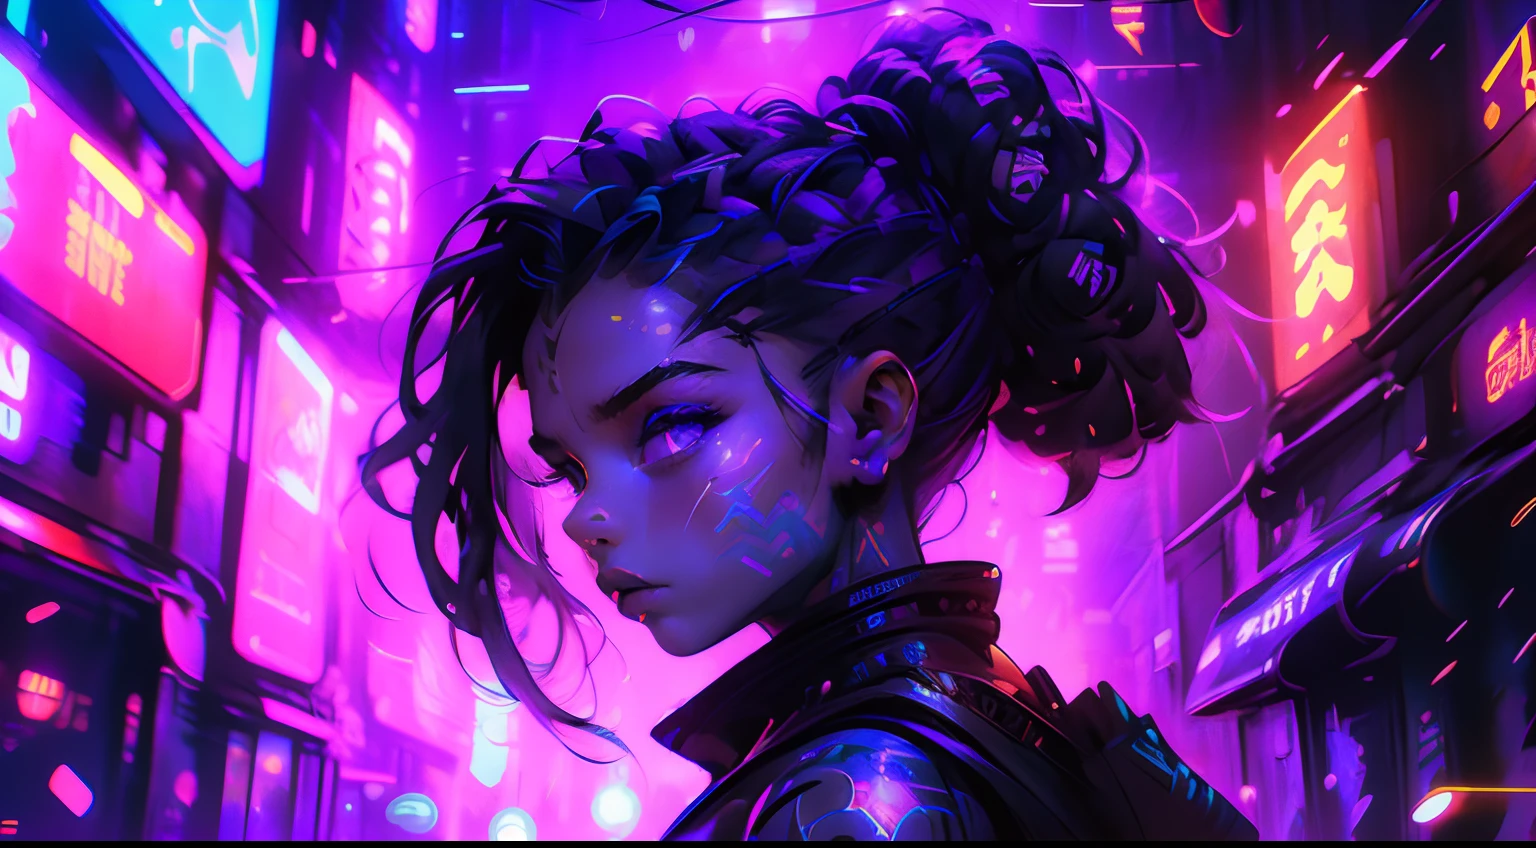 A mesmerizing futuristic portrait of a girl with glowing neon tattoos, her eyes shining with a hint of otherworldly power. Her hair flows like strands of pulsating energy, surrounded by a swirling vortex of cosmic dust. The background showcases a sprawling metropolis of sleek, towering skyscrapers, bathed in a hazy purple light.